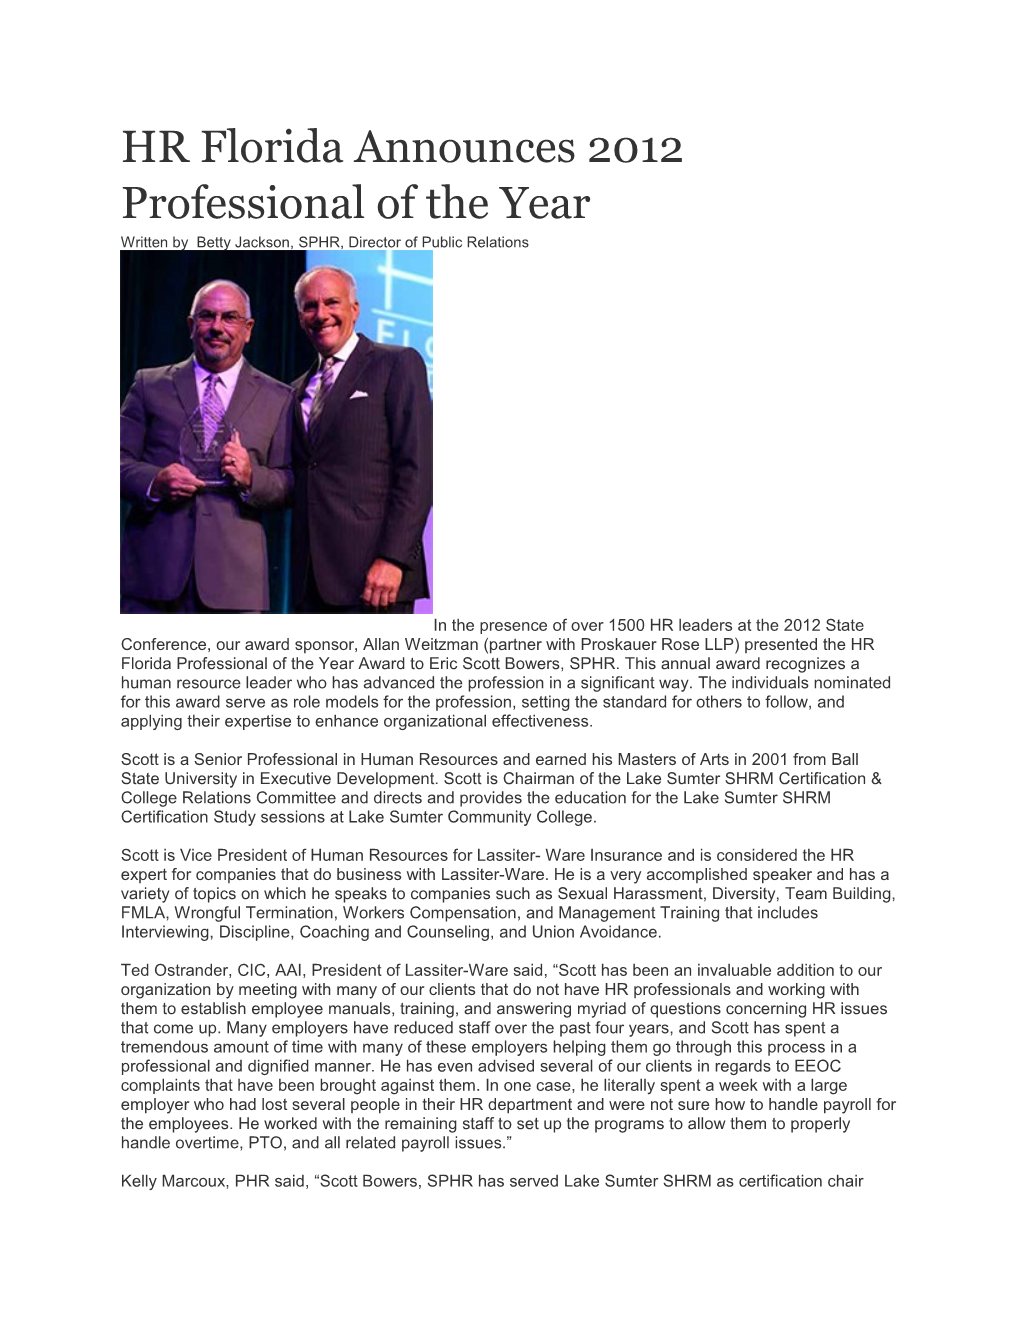 HR Florida Announces 2012 Professional of the Year